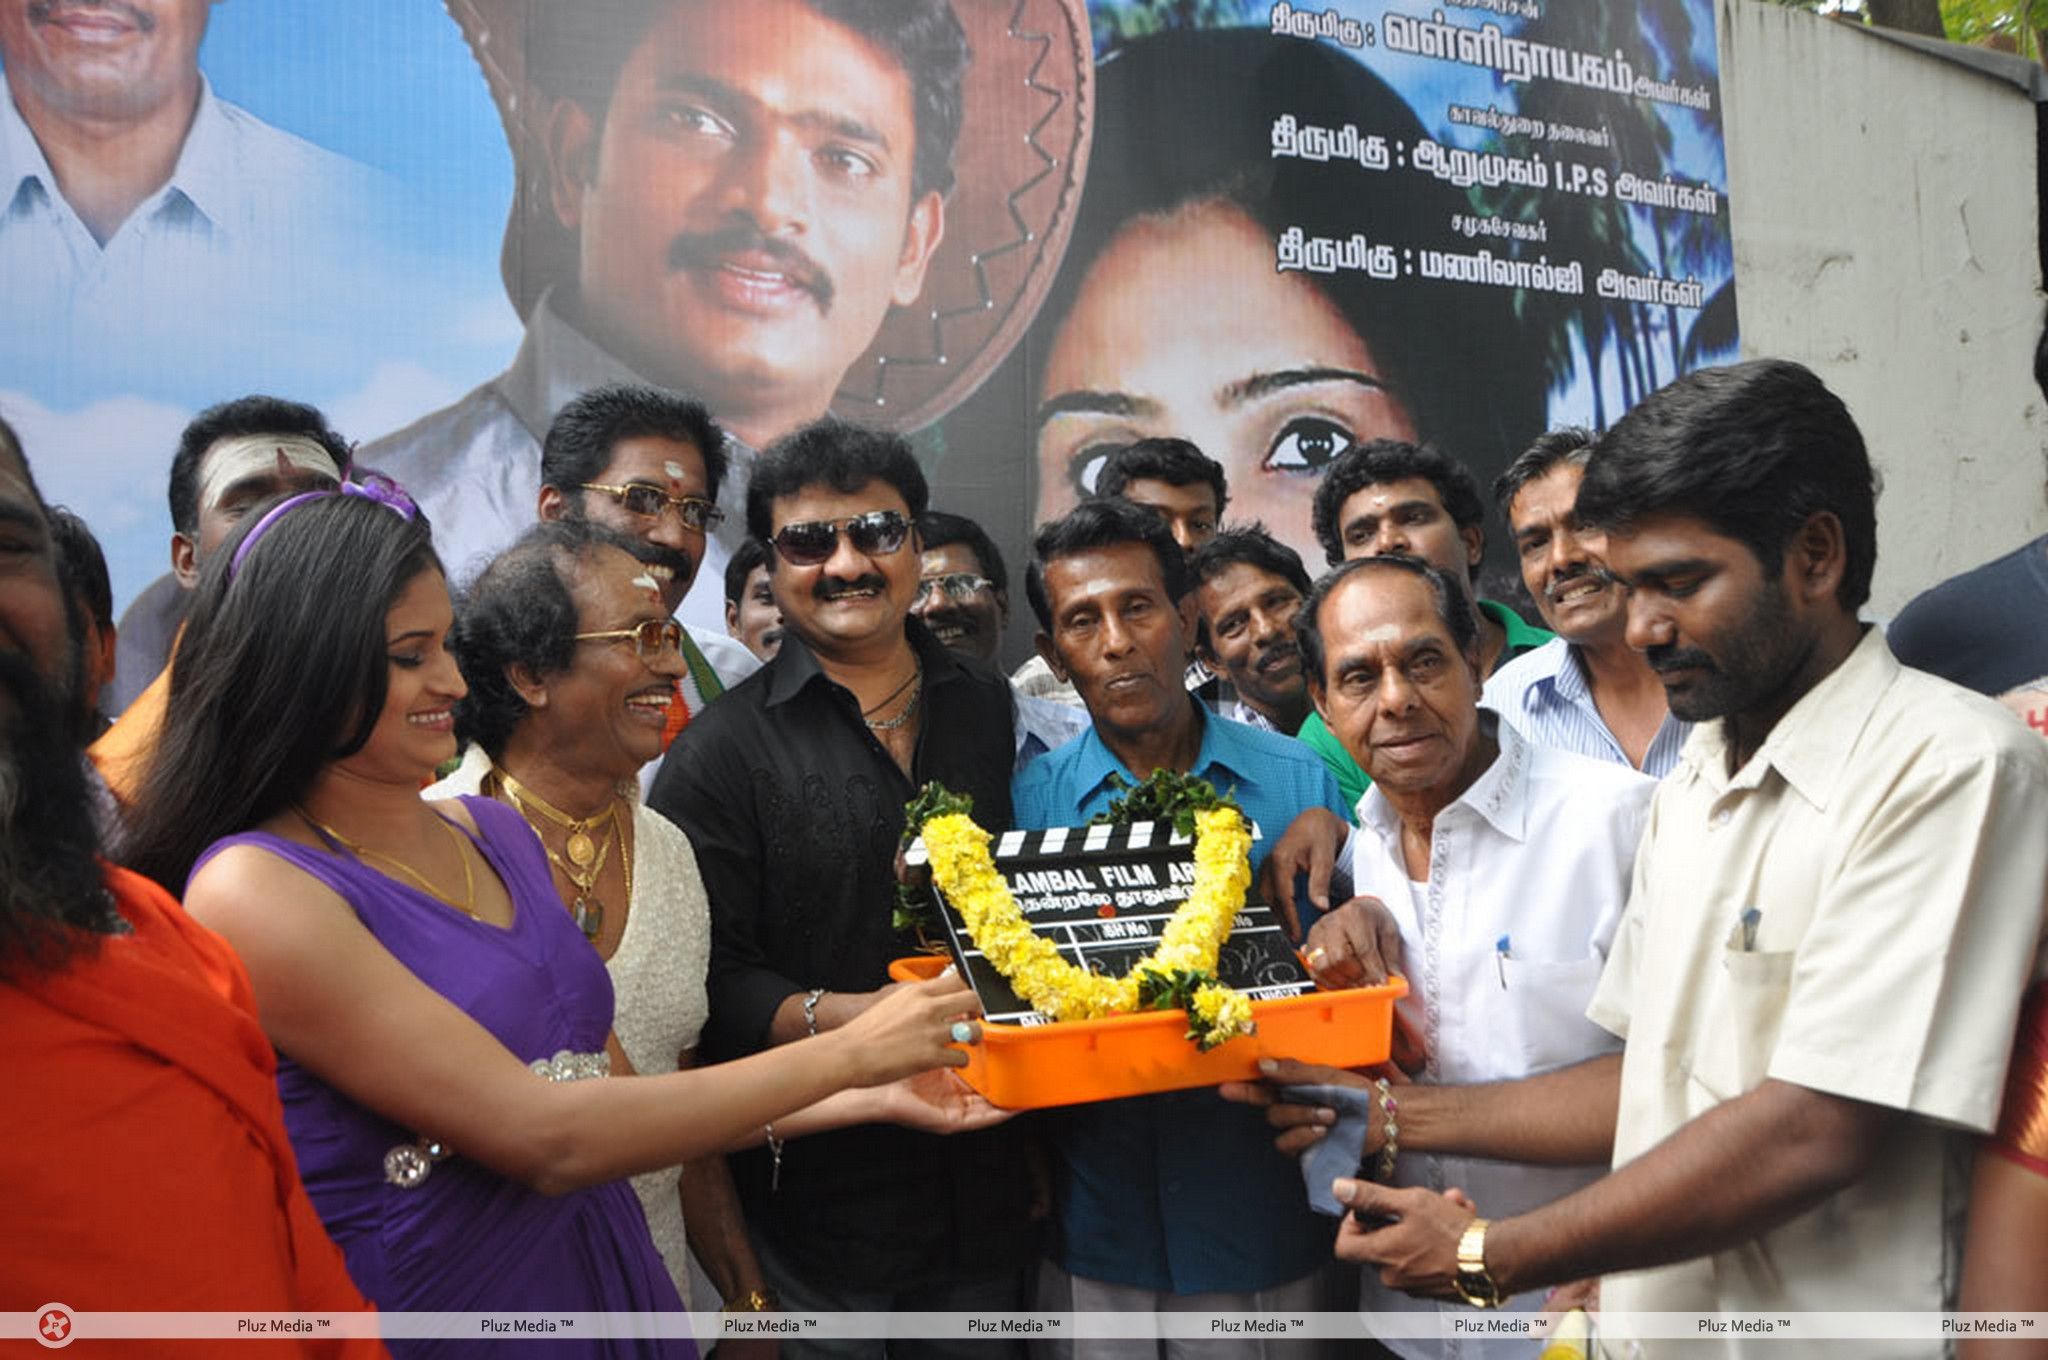 Thendrale Thudhuvidu Movie Launch Photos | Picture 367619